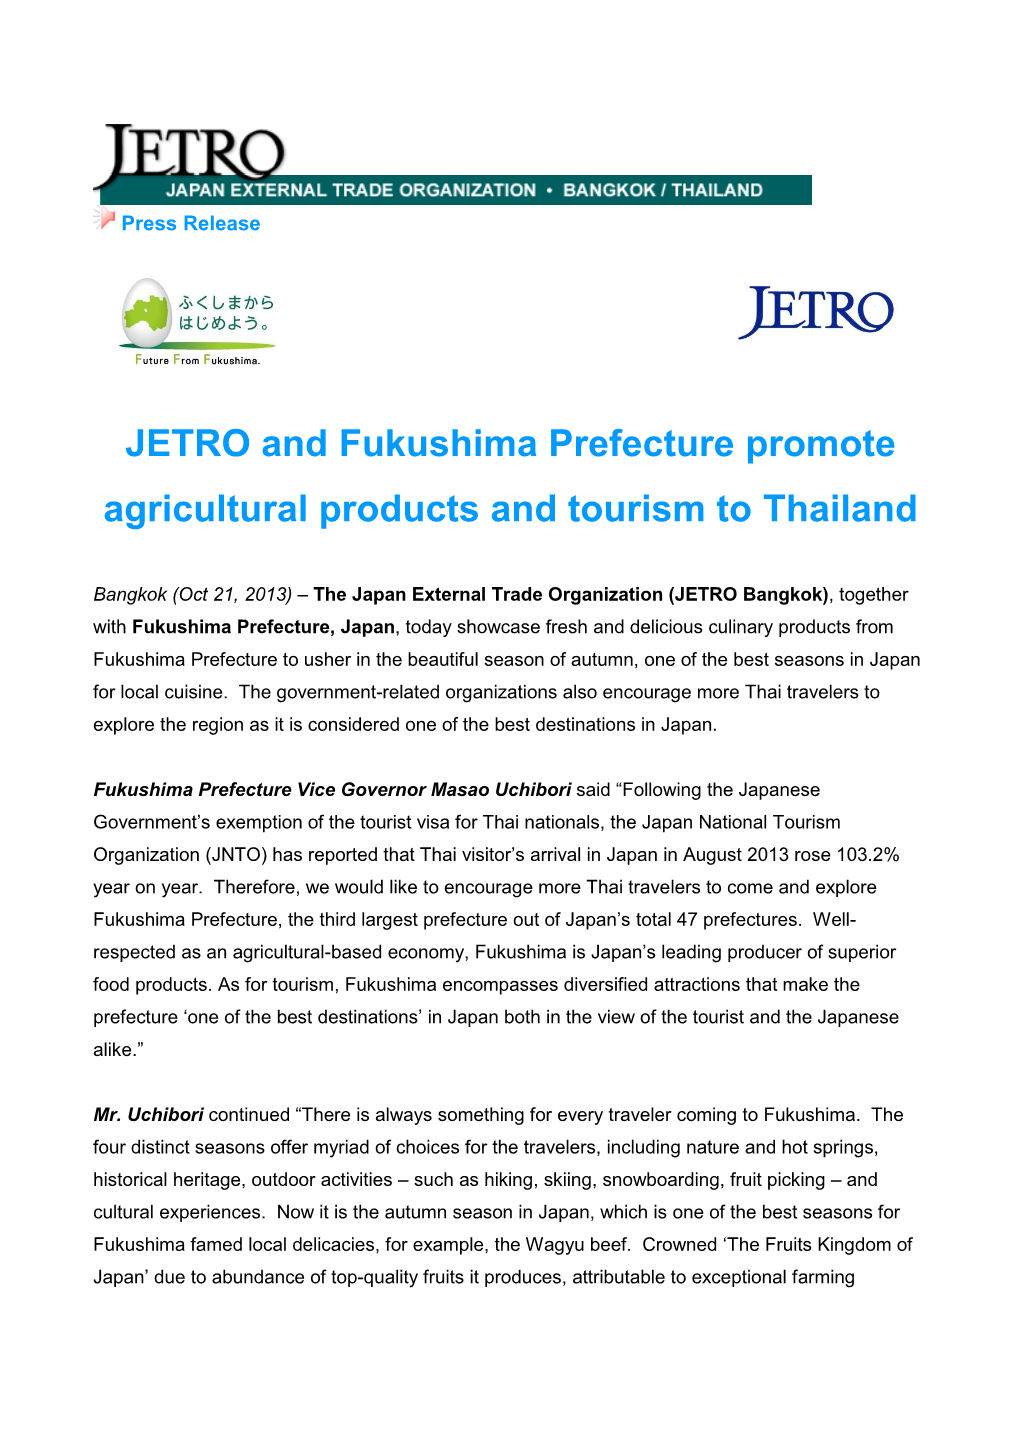 JETRO and Fukushima Prefecture Promote Agricultural Products and Tourism to Thailand